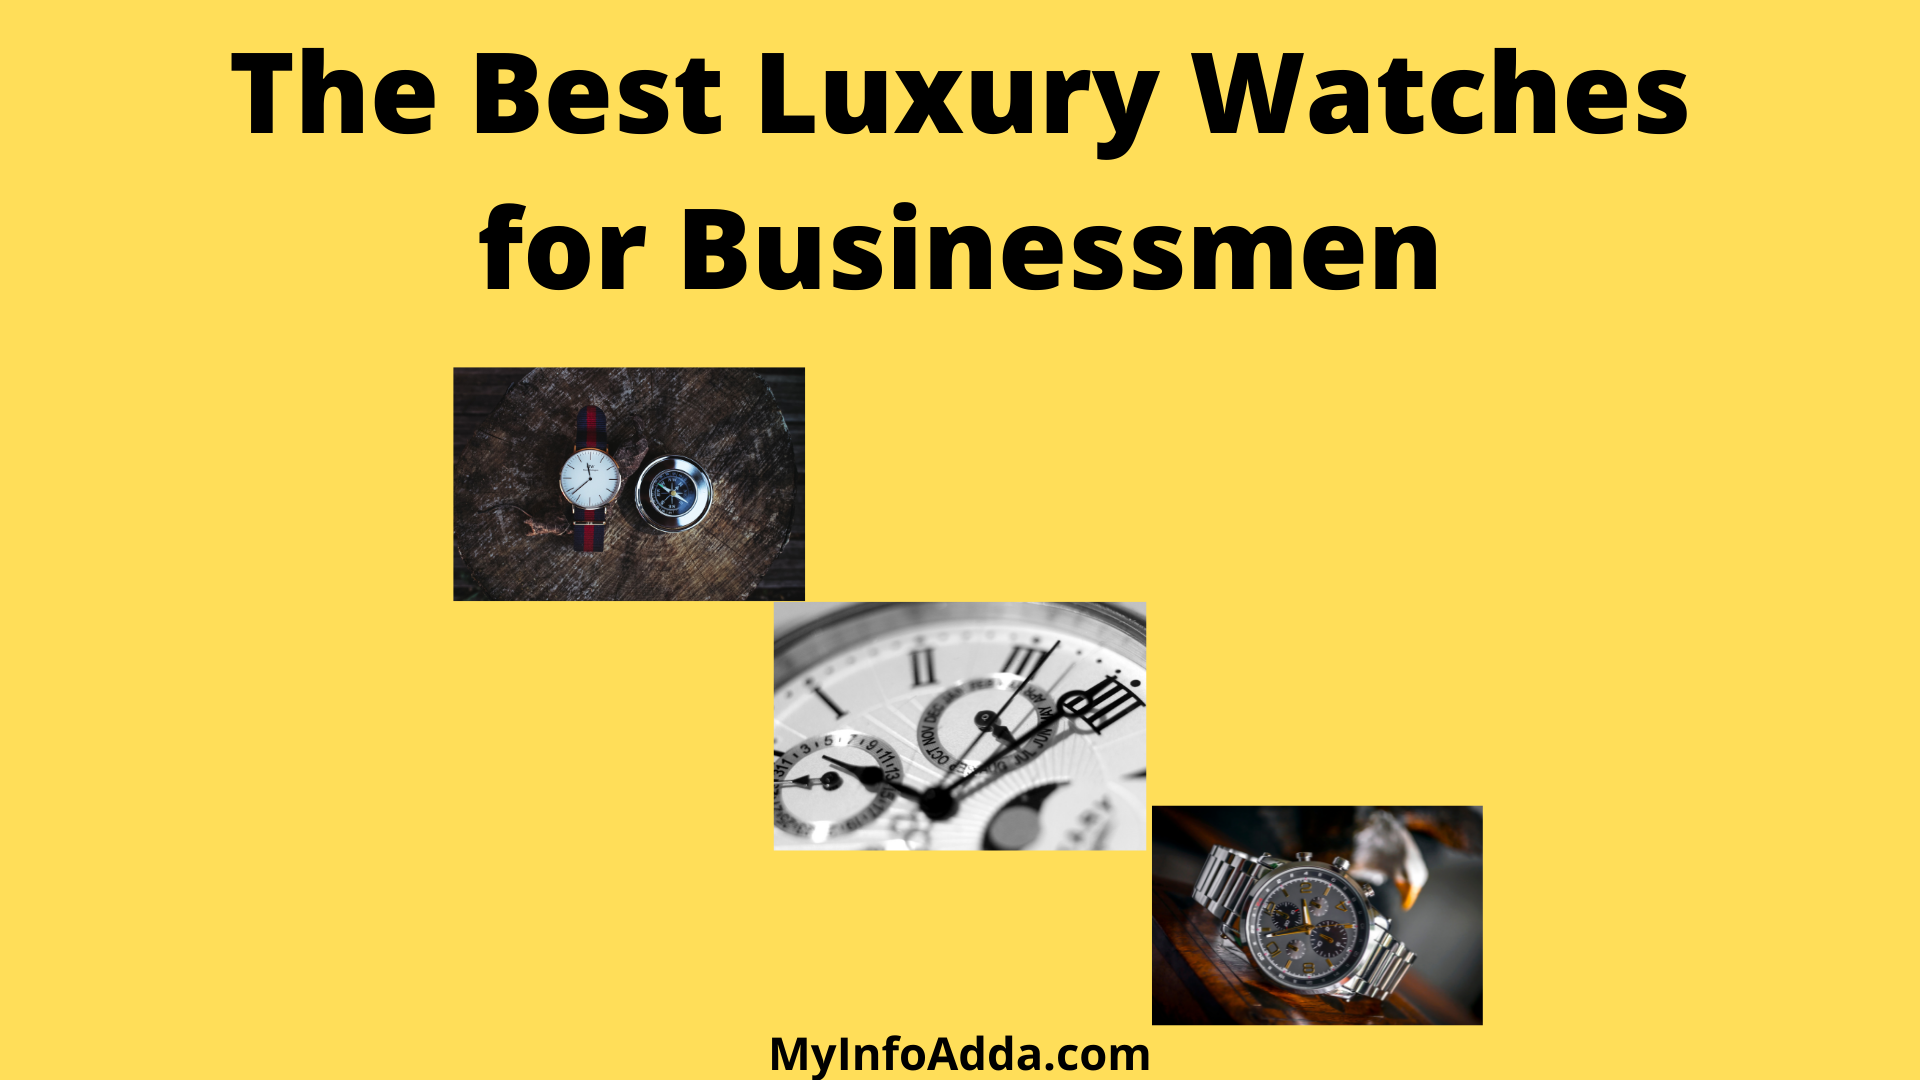 The Best Luxury Watches for Businessmen